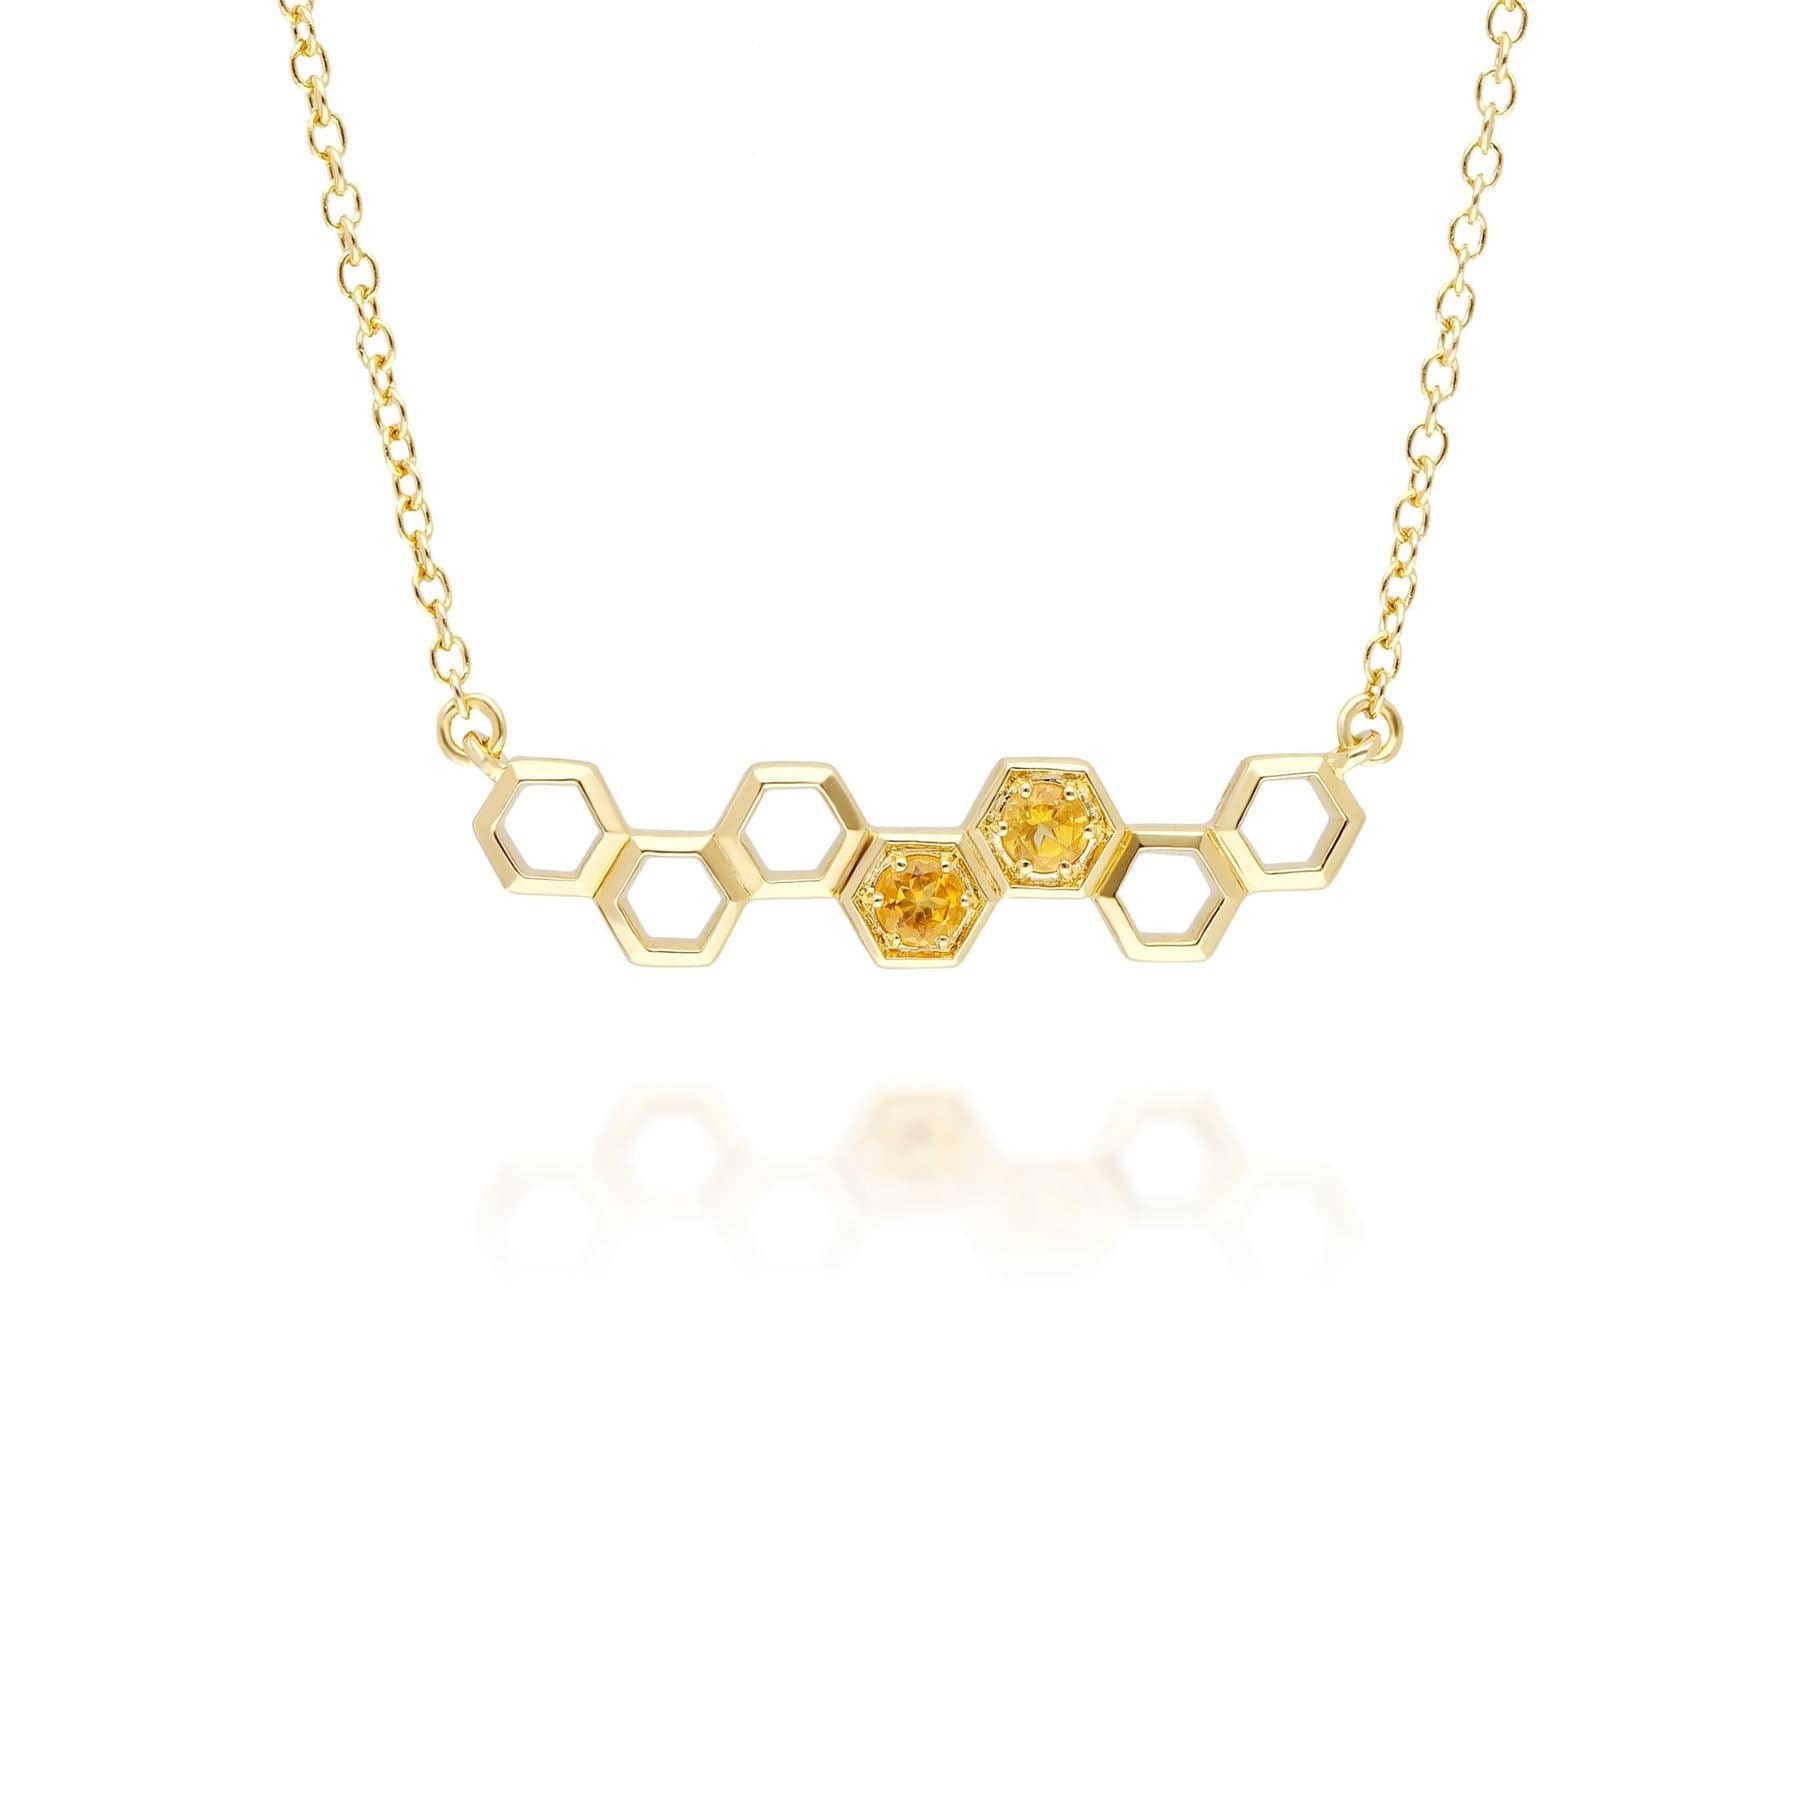 Photos - Pendant / Choker Necklace Honeycomb Inspired Citrine Link Necklace in 9ct Yellow Gold